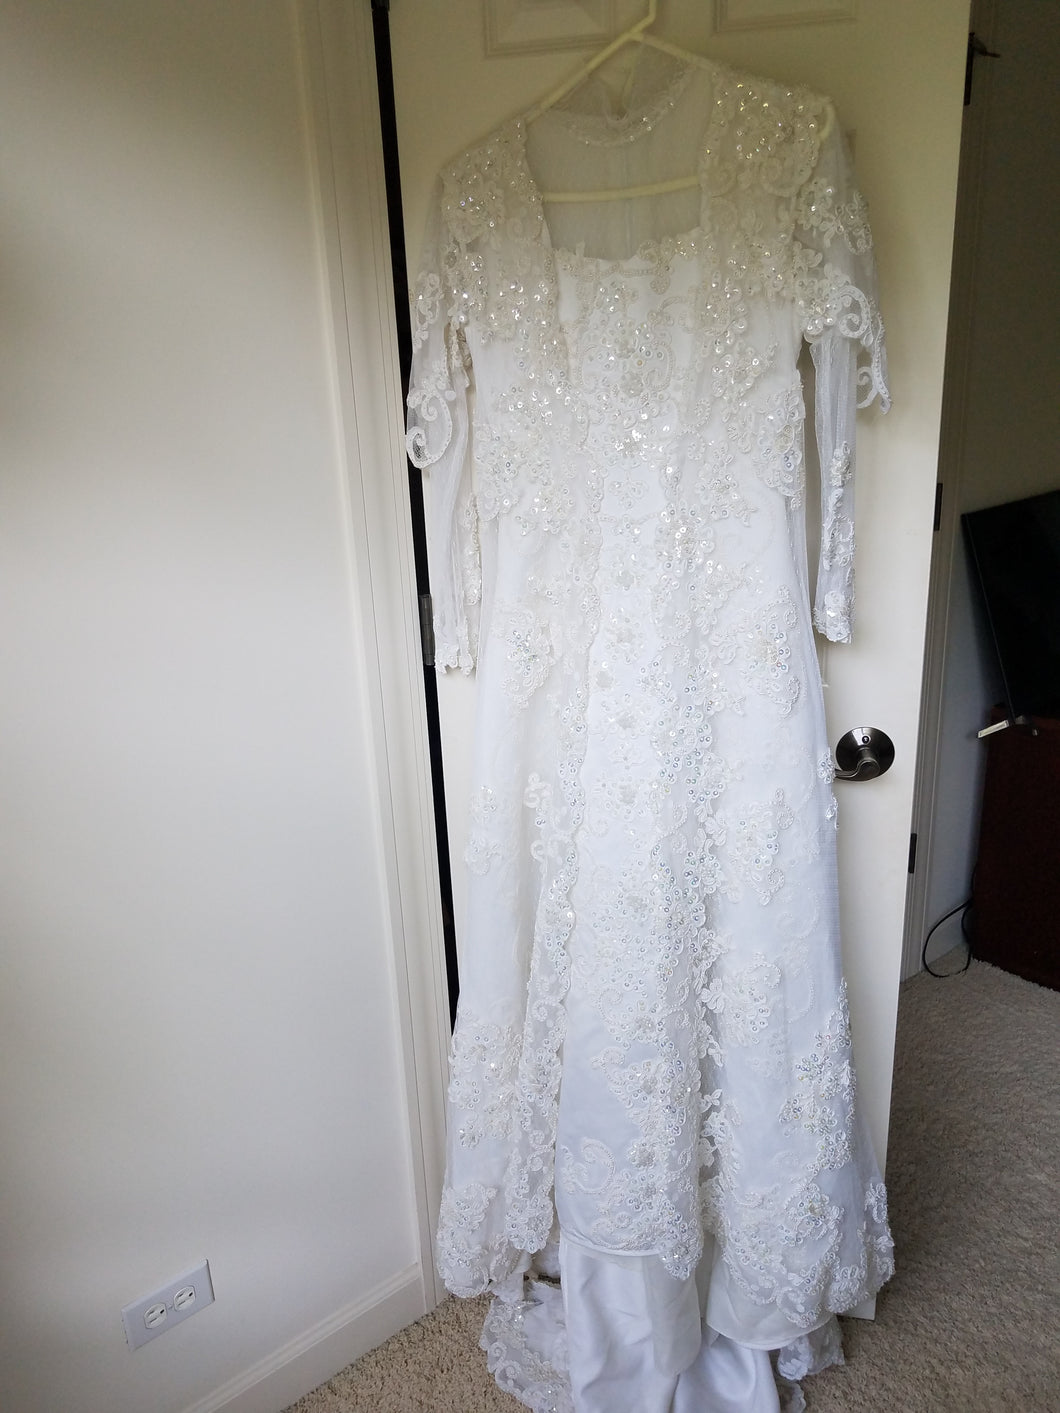 Miss Philippines 'Padme Queen Amidala' size 2 used wedding dress front view on hanger